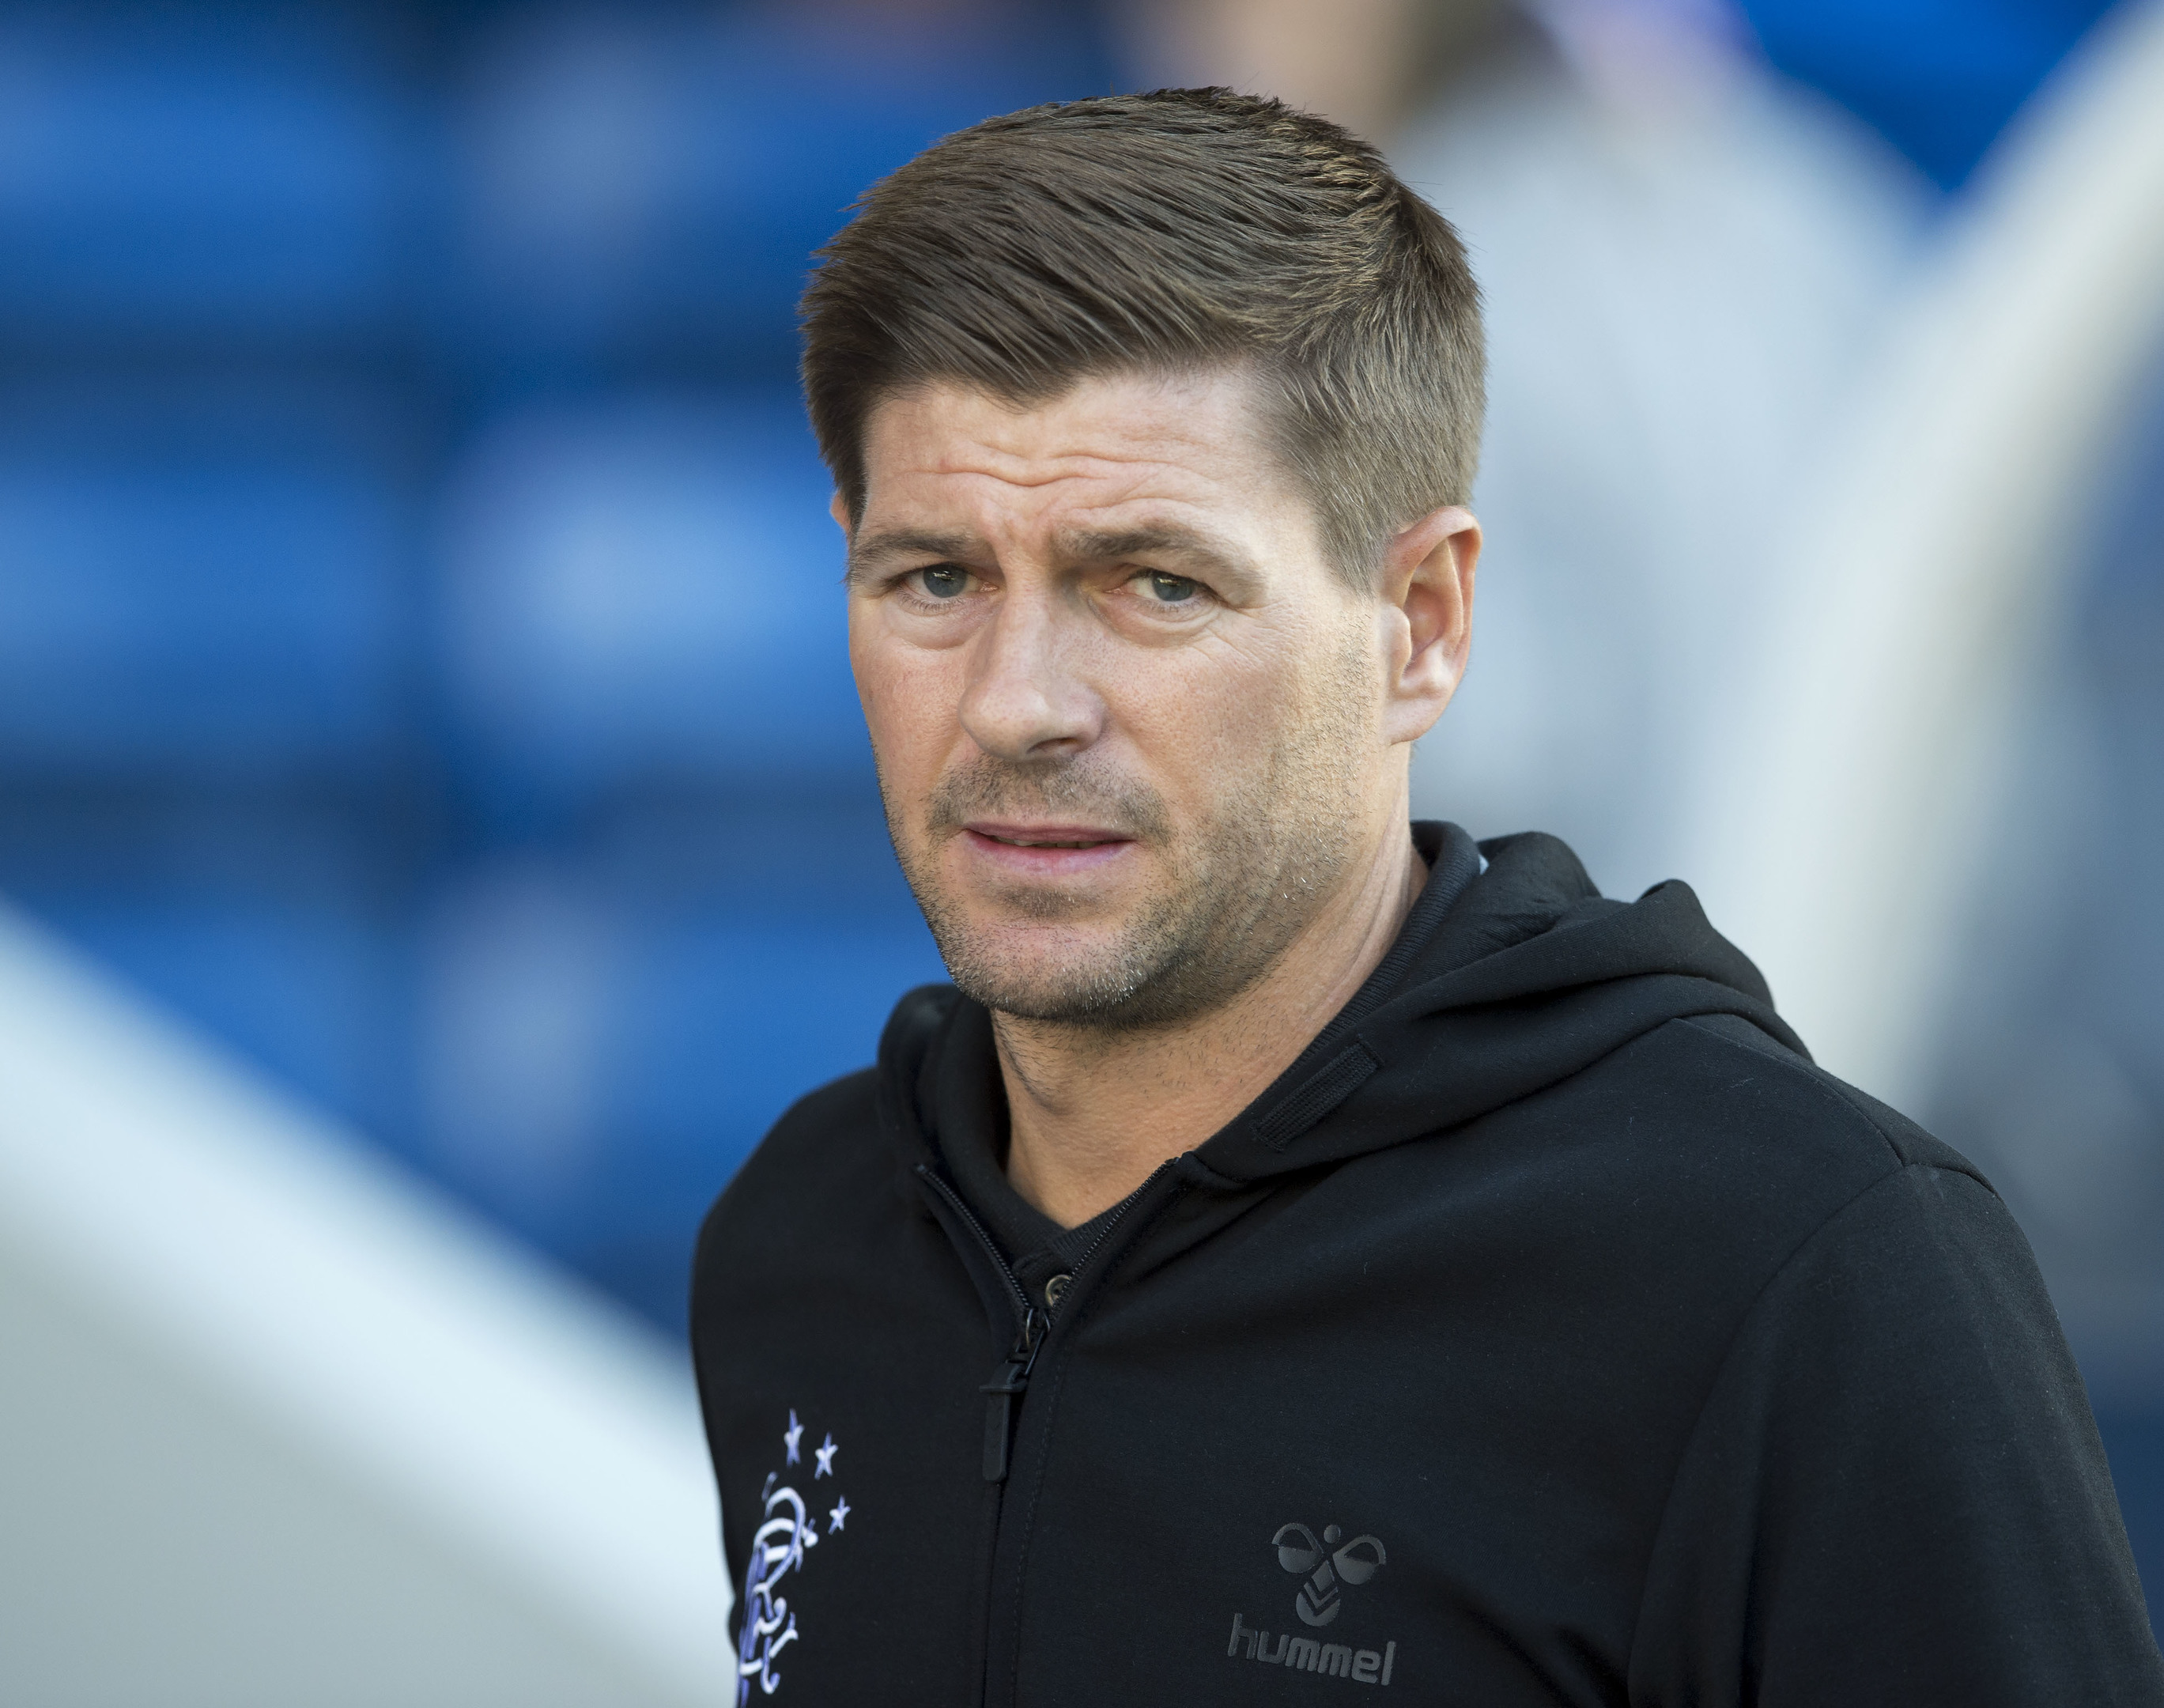 Rangers boss Steven Gerrard says he was impressed by new signing